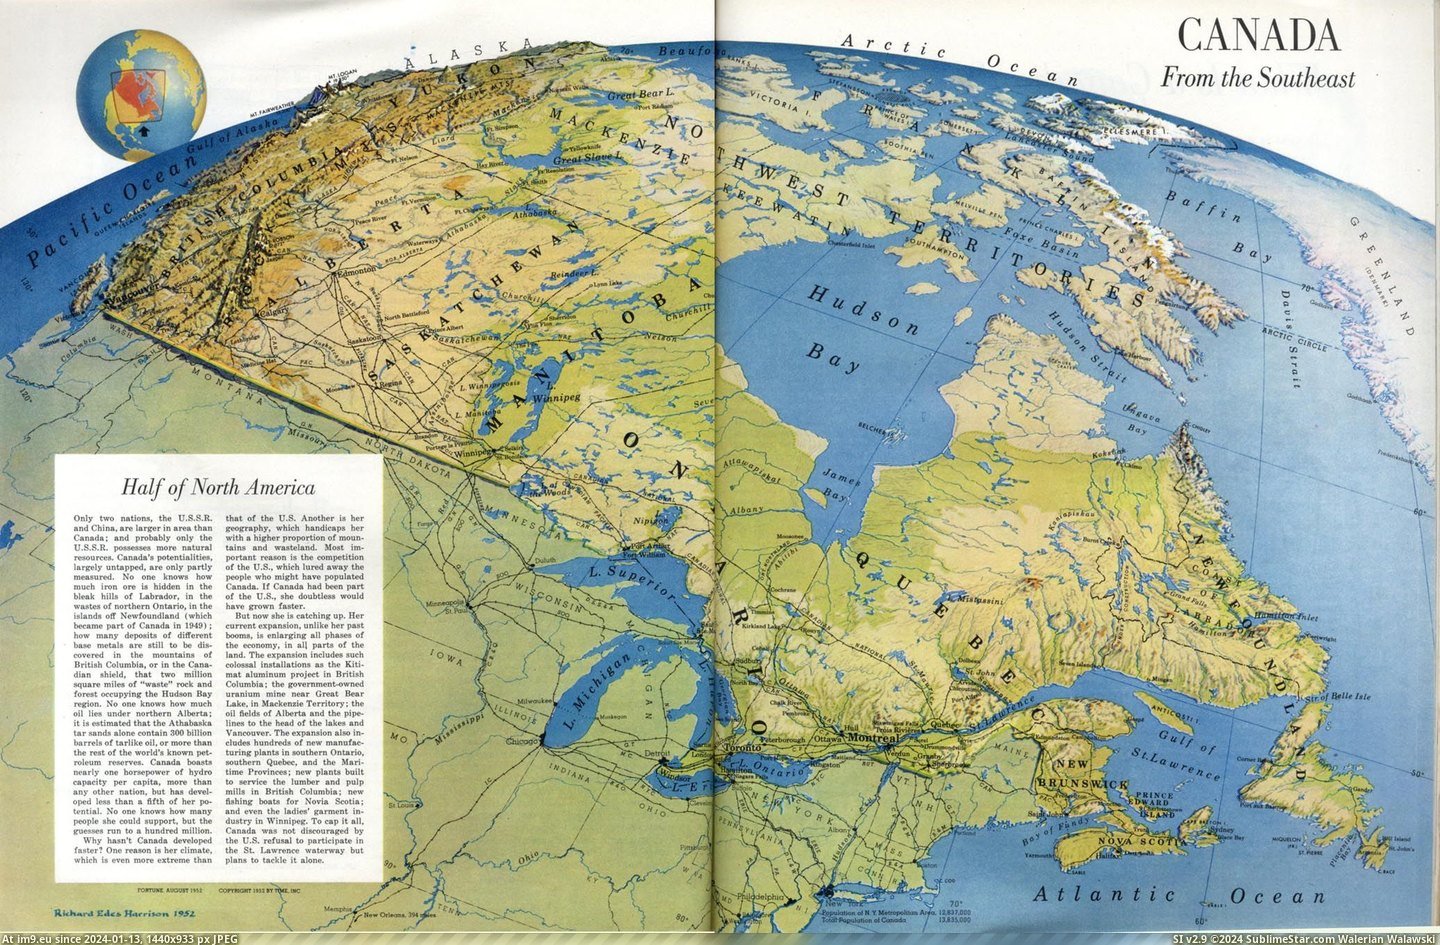 #Canada #Southeast #Harrisson #Richard [Mapporn] Canada seen from the Southeast. Made by Richard Harrisson in 1952 [2070x1353] Pic. (Image of album My r/MAPS favs))